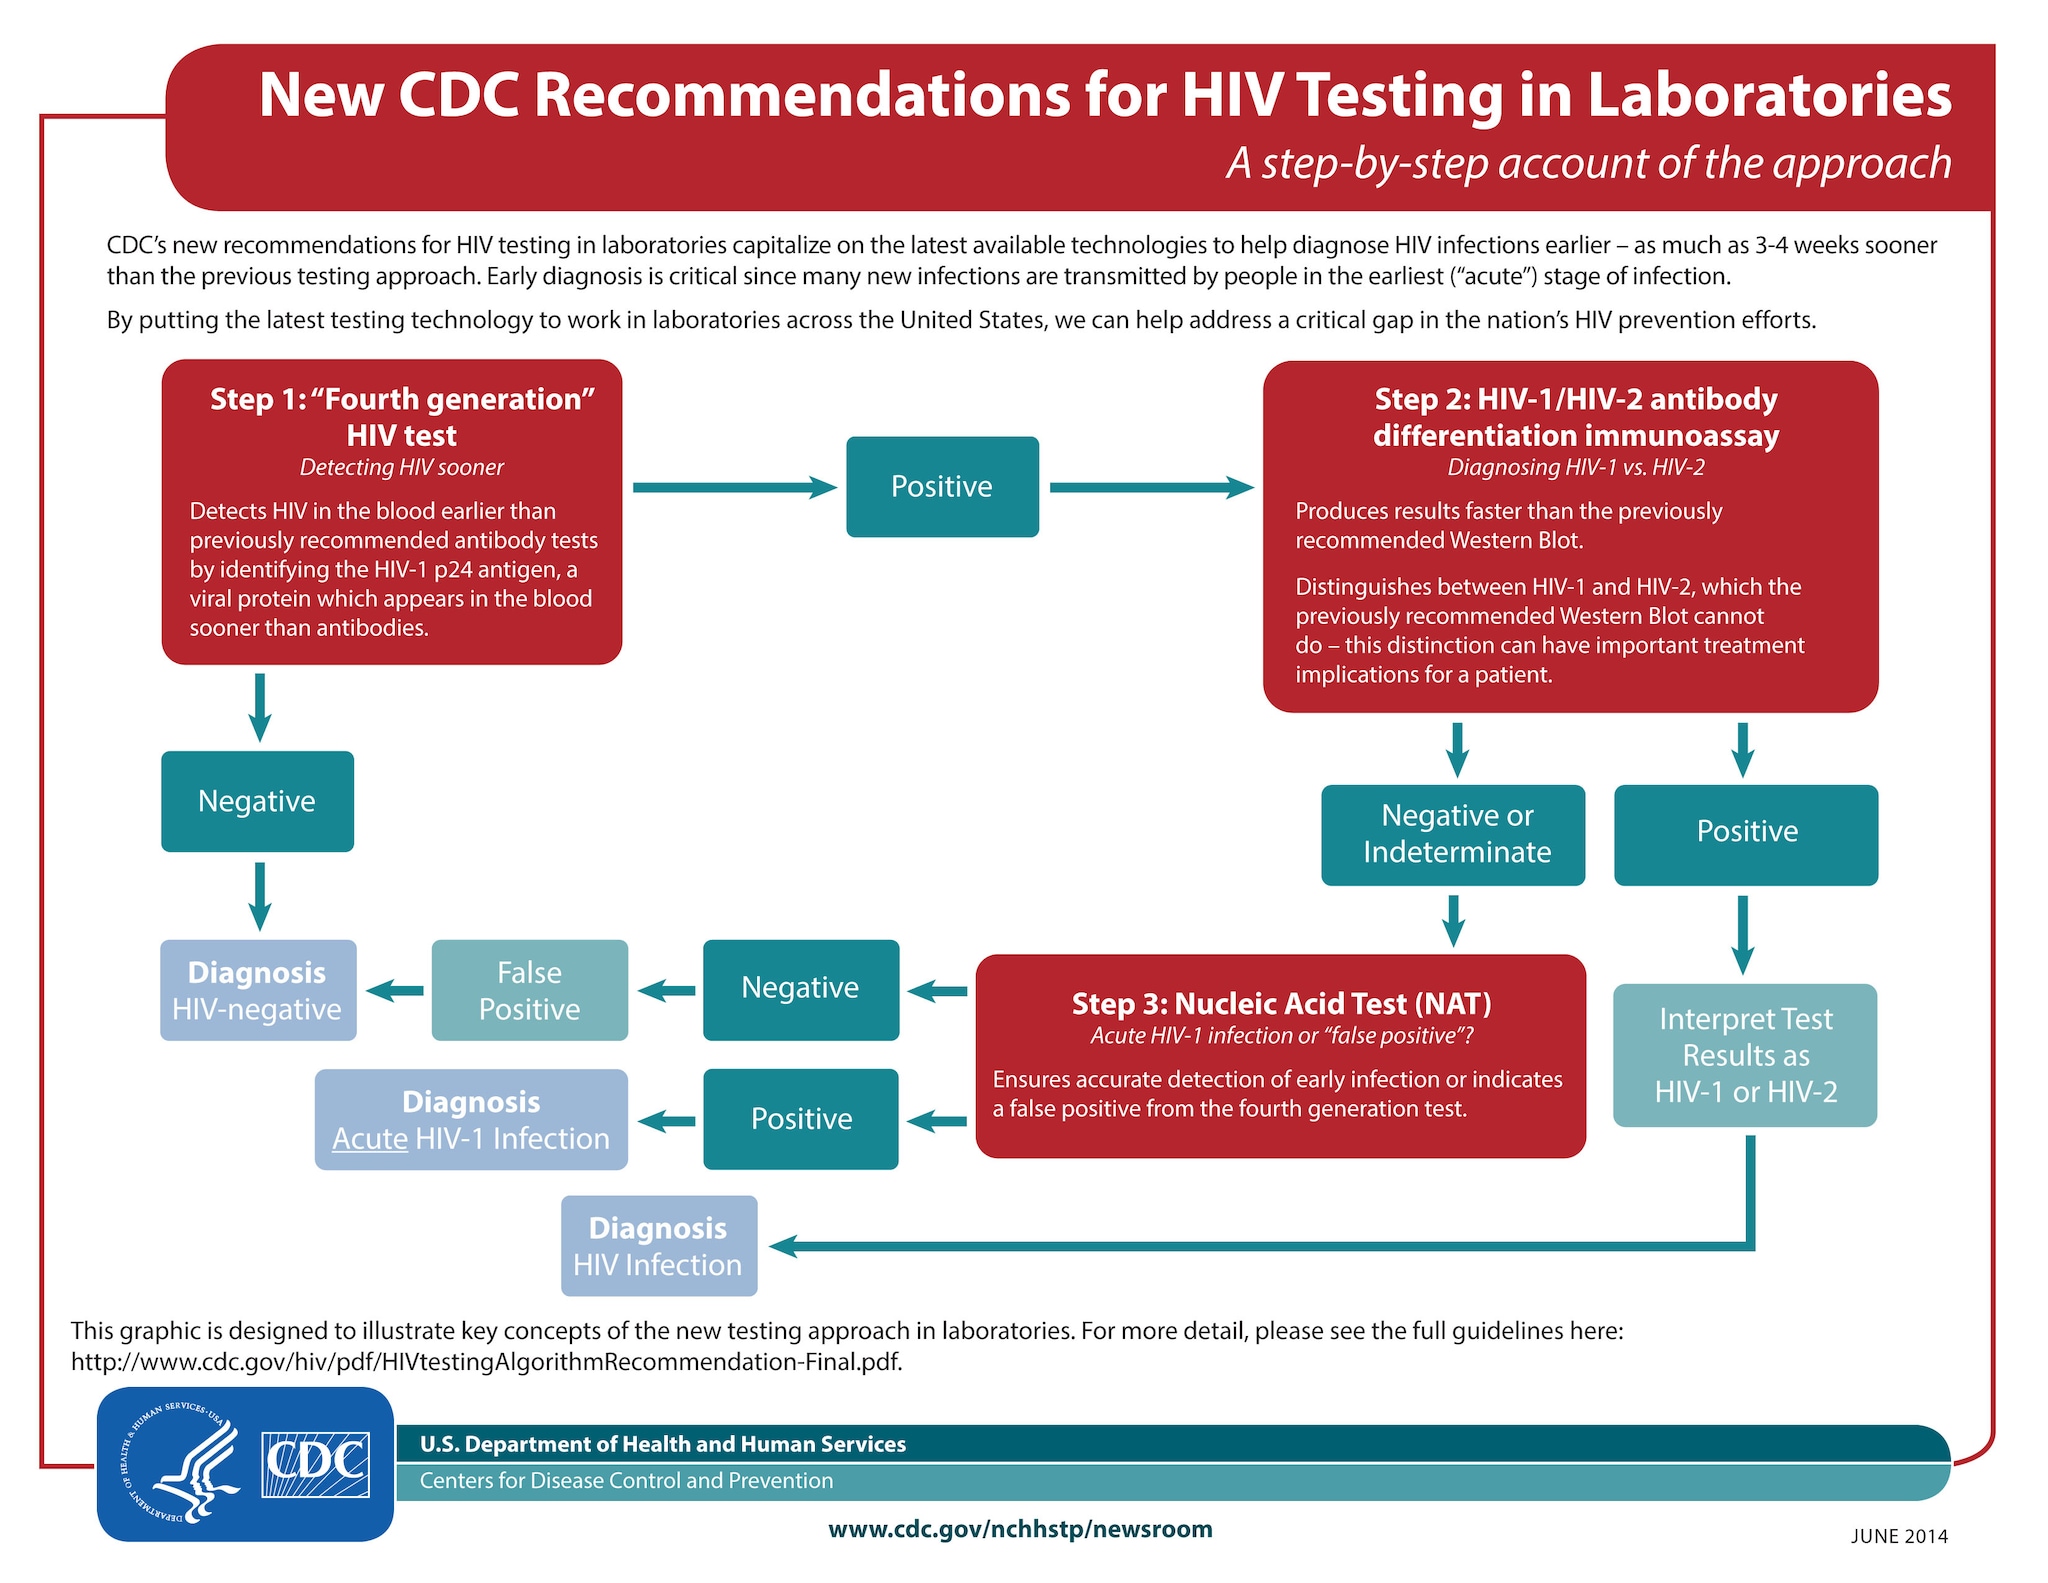 Revised CDC Guidelines for HIV Testing Encourage Earlier Diagnoses